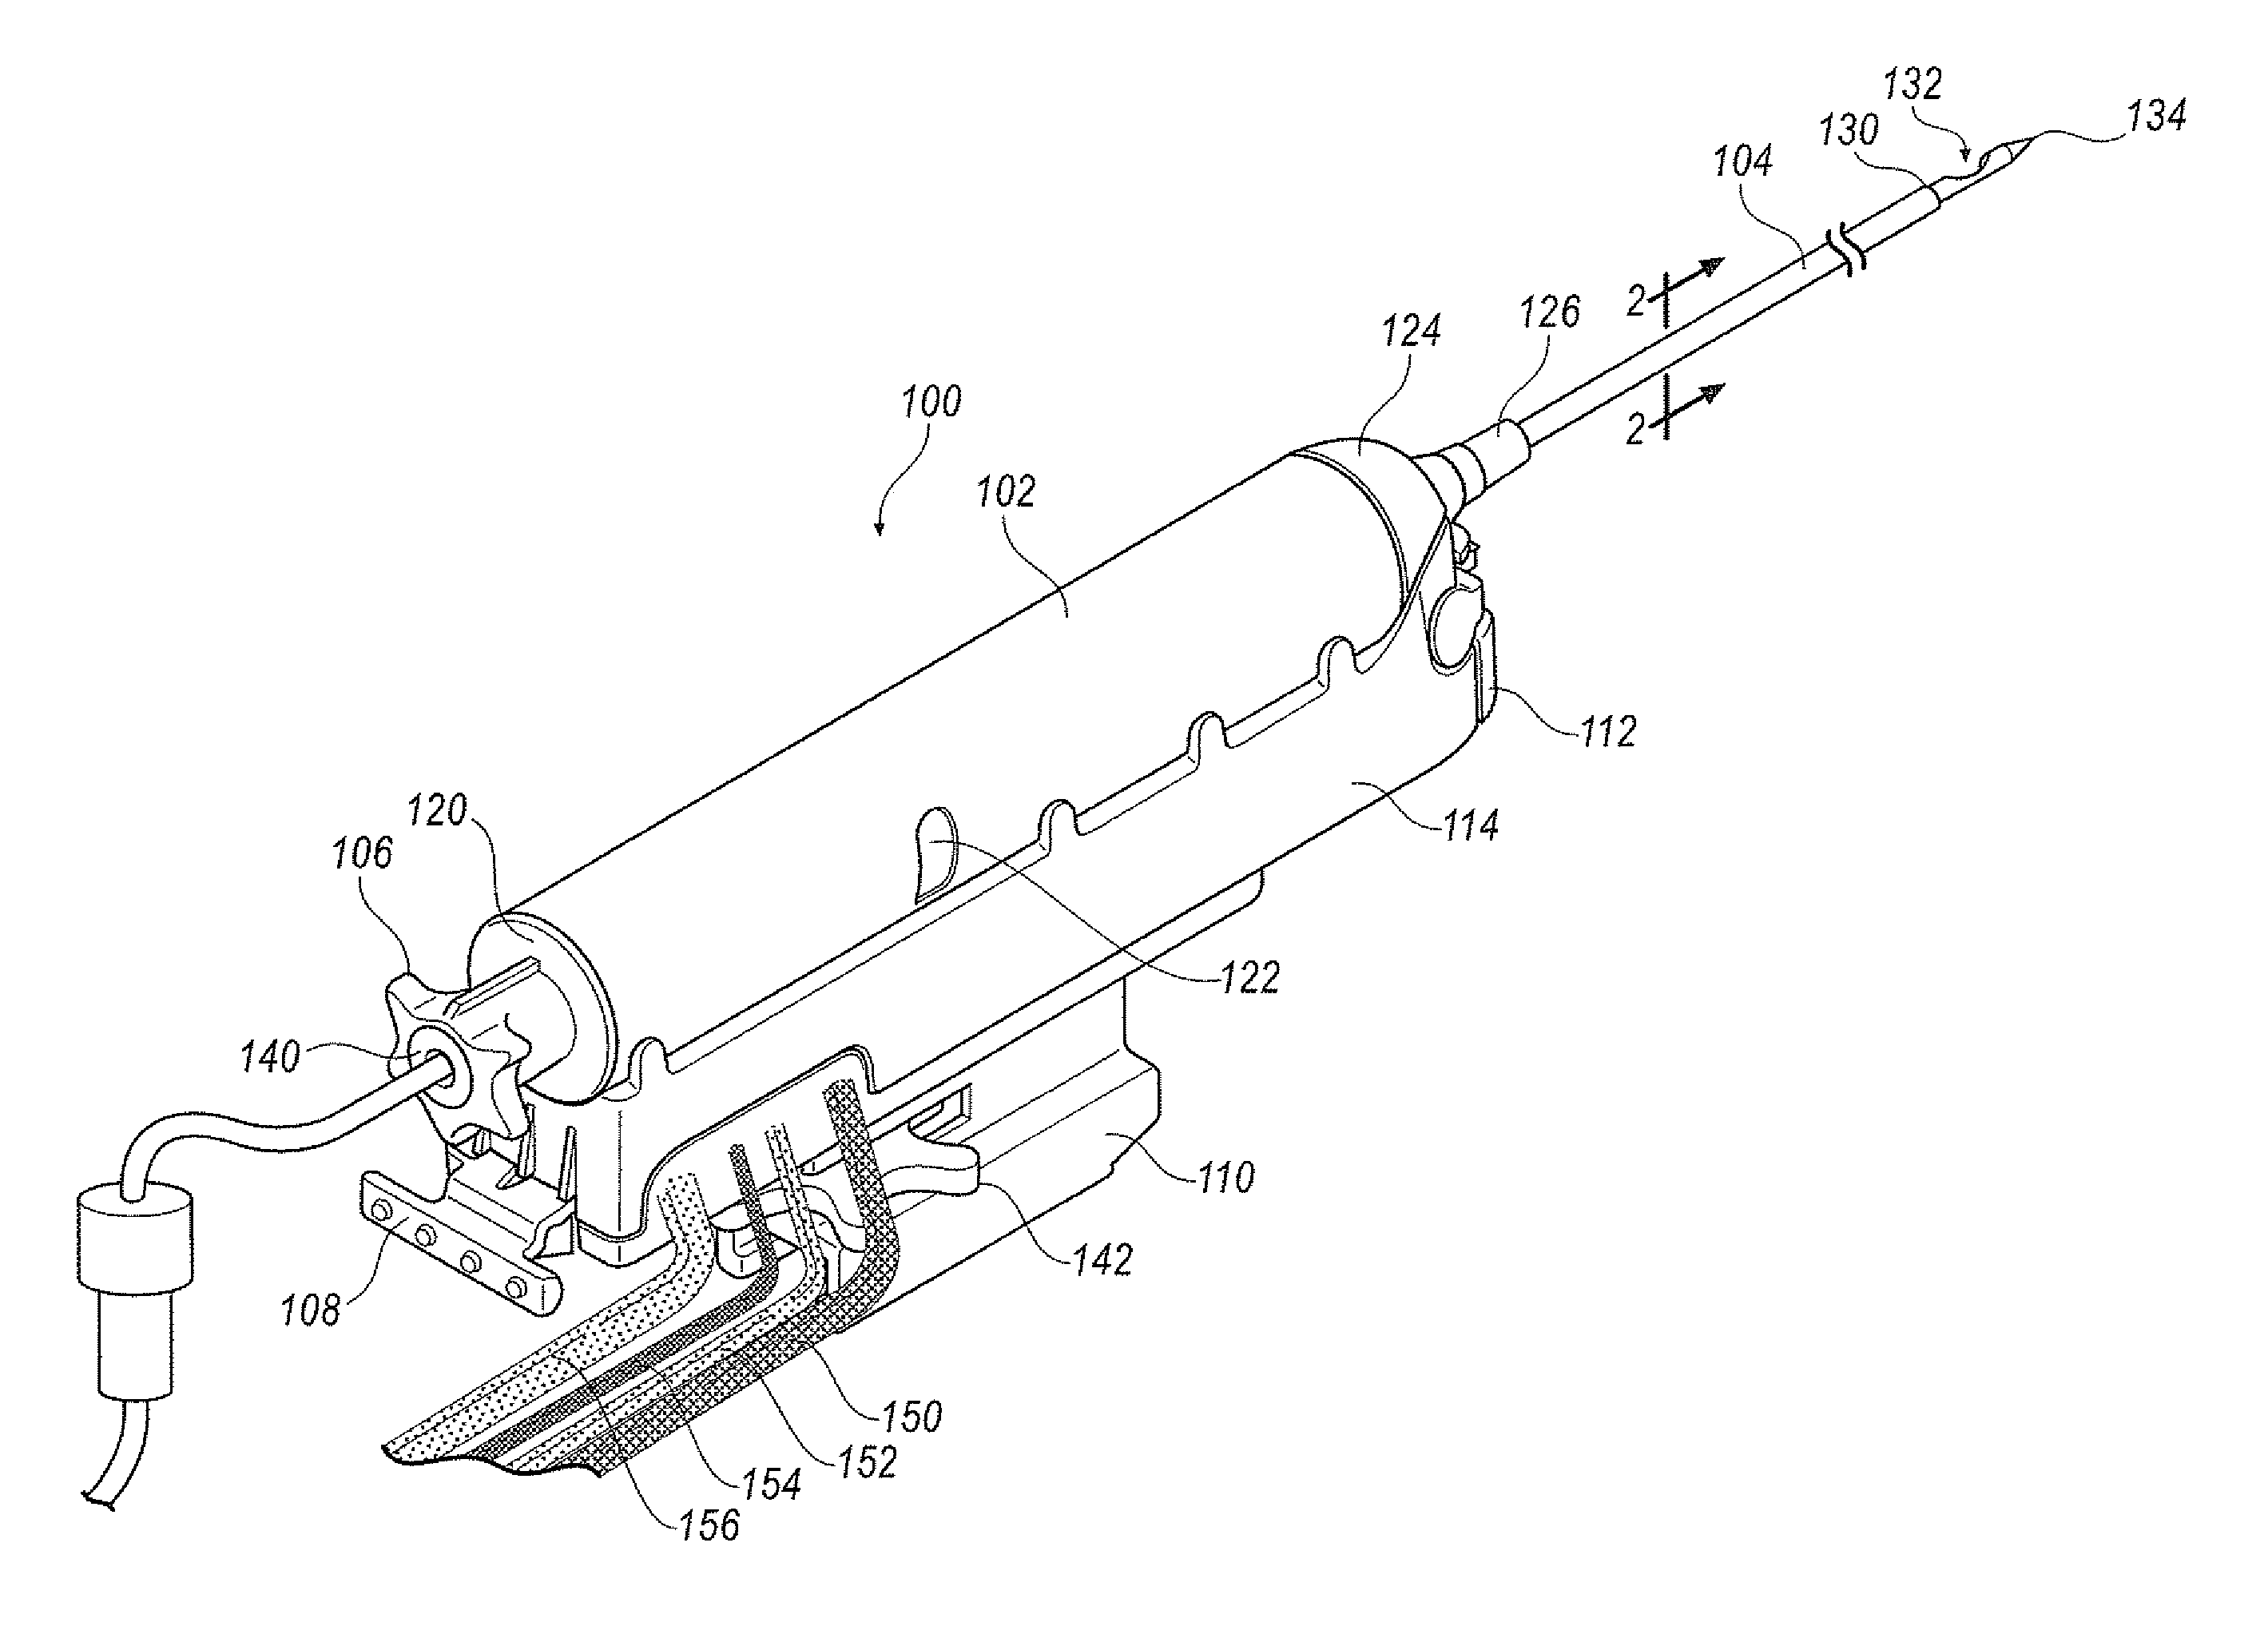 Surgical device and method for using same